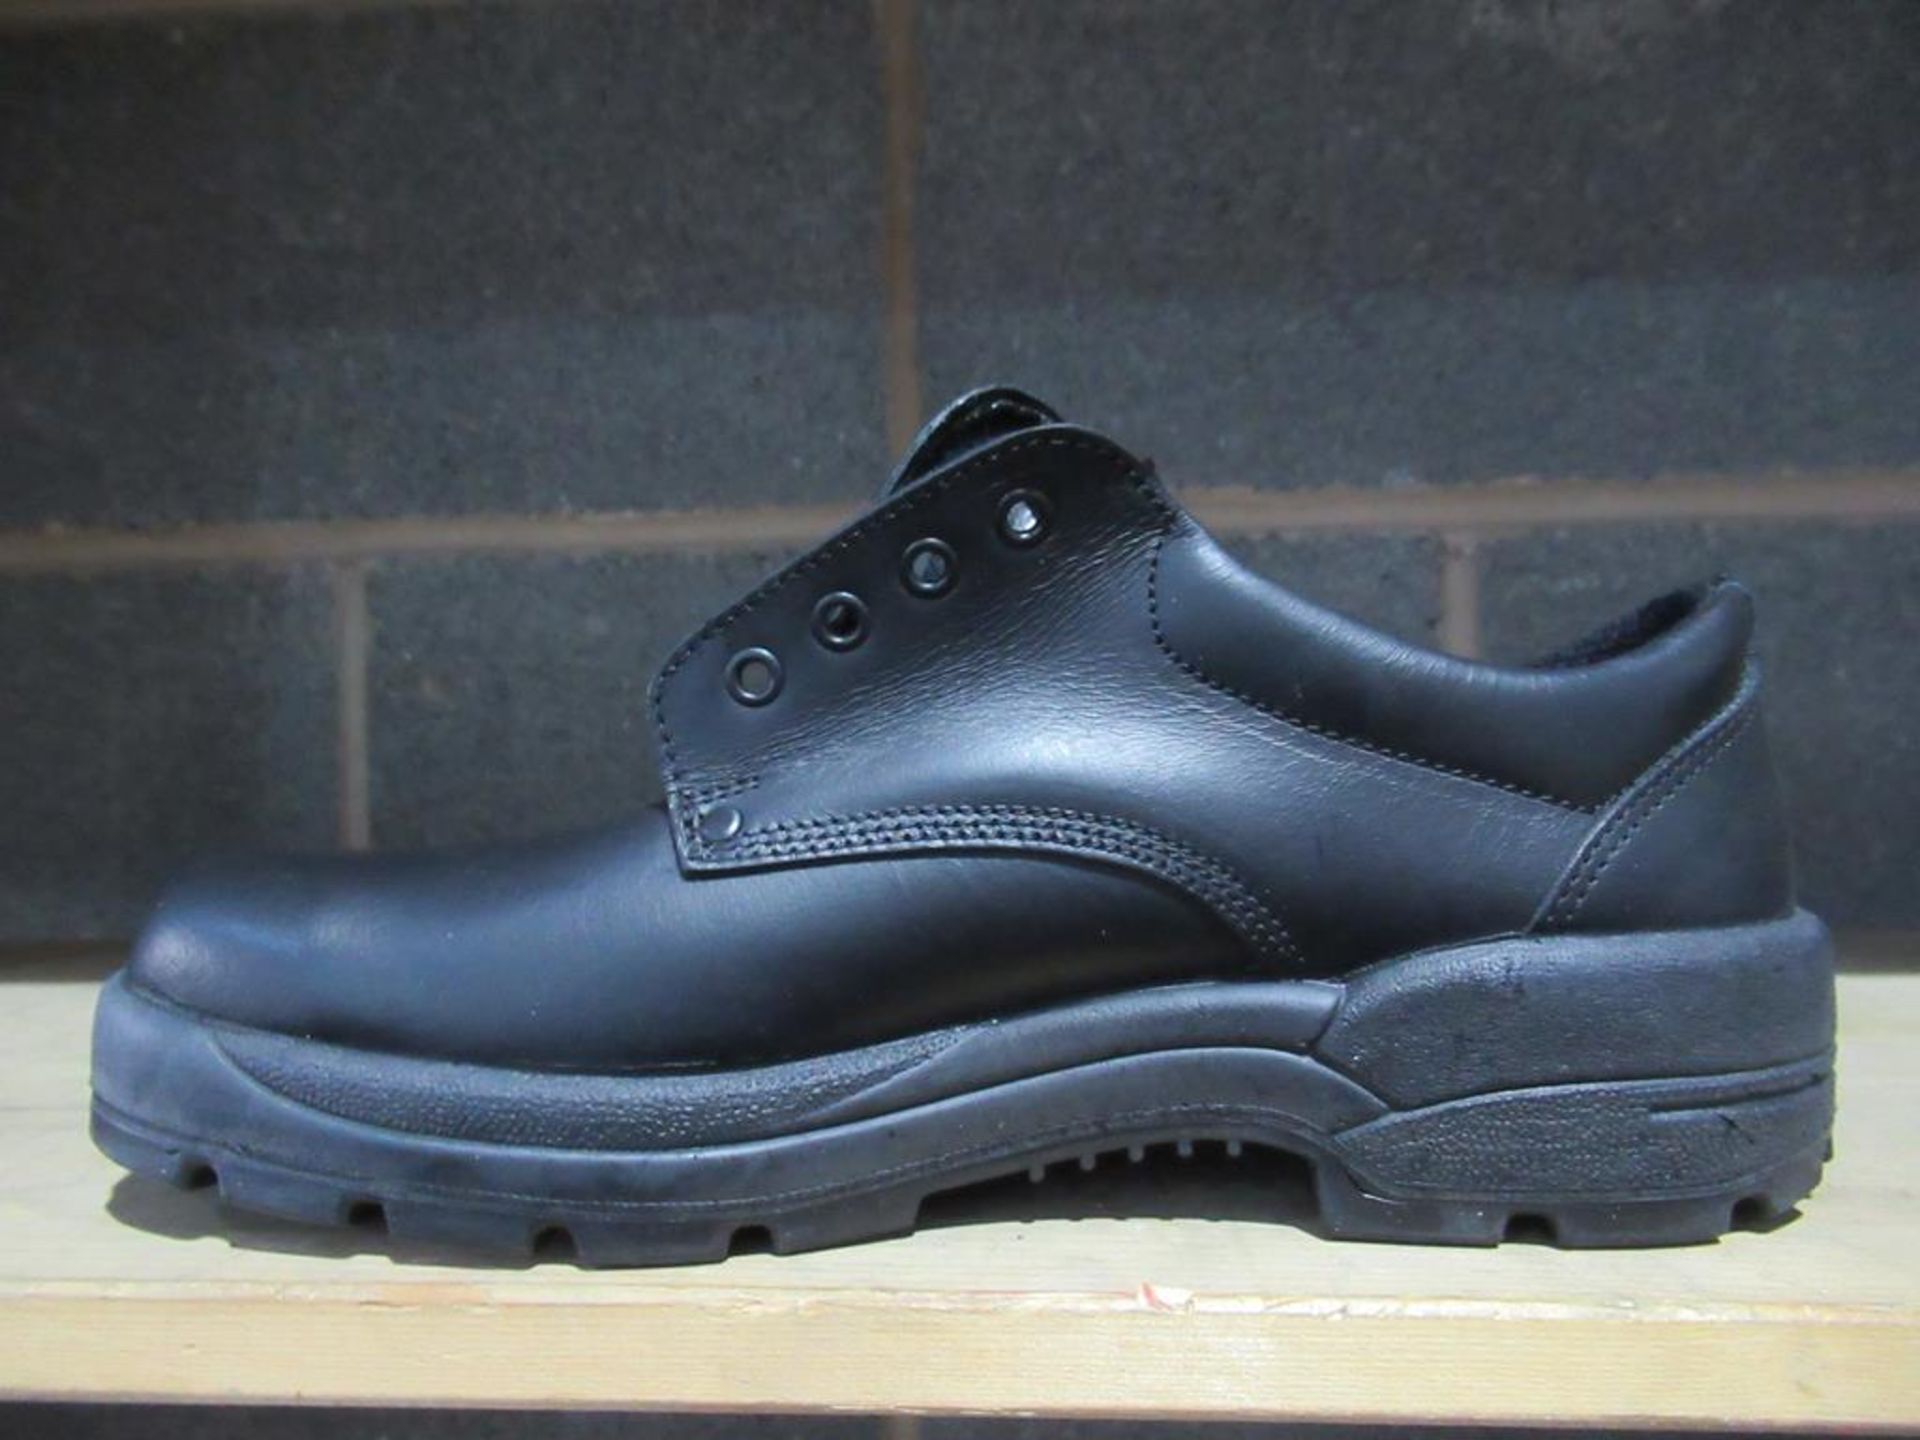 3x Pairs of Safety Shoes (size 9) - Image 6 of 7